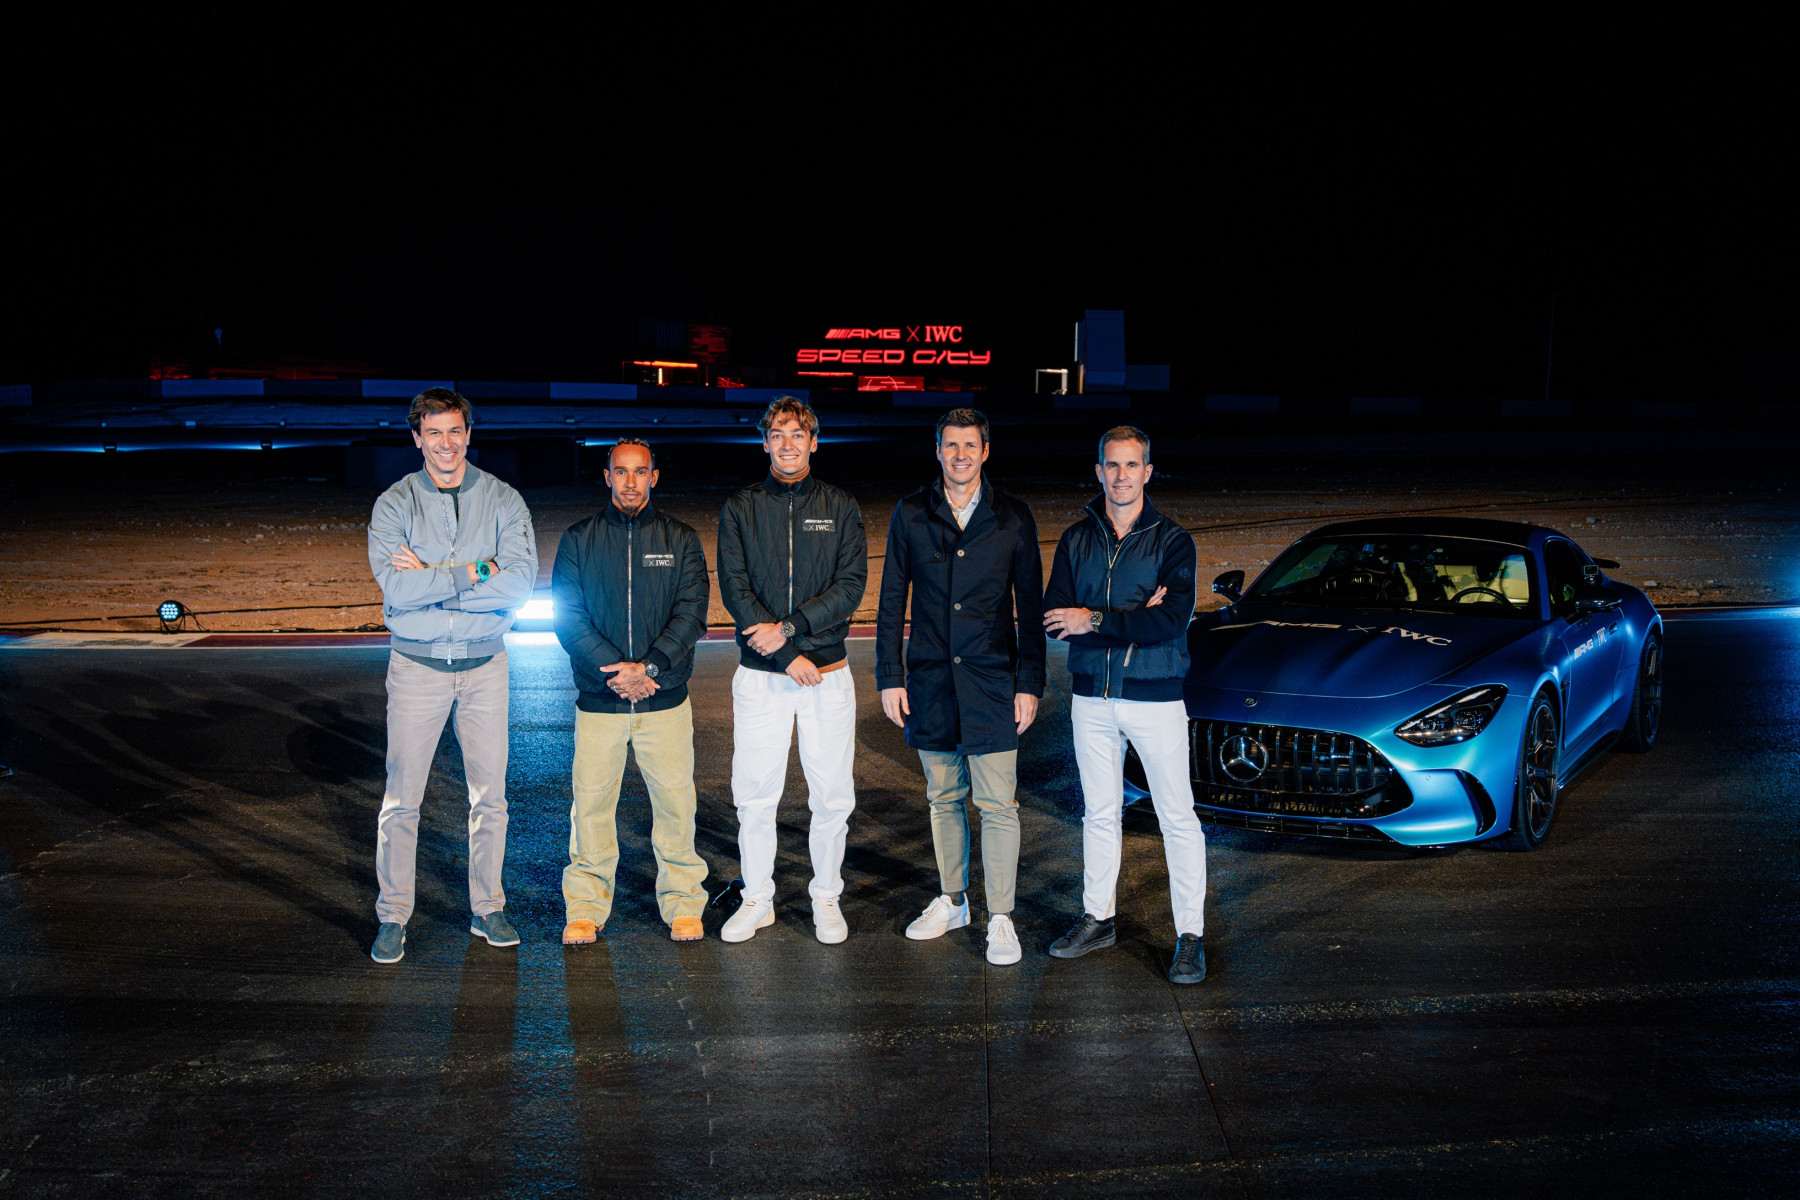 Lewis Hamilton and George Russel Join IWC Schaffhausen and Mercedes-AMG at ‘Speed City’  Las Vegas